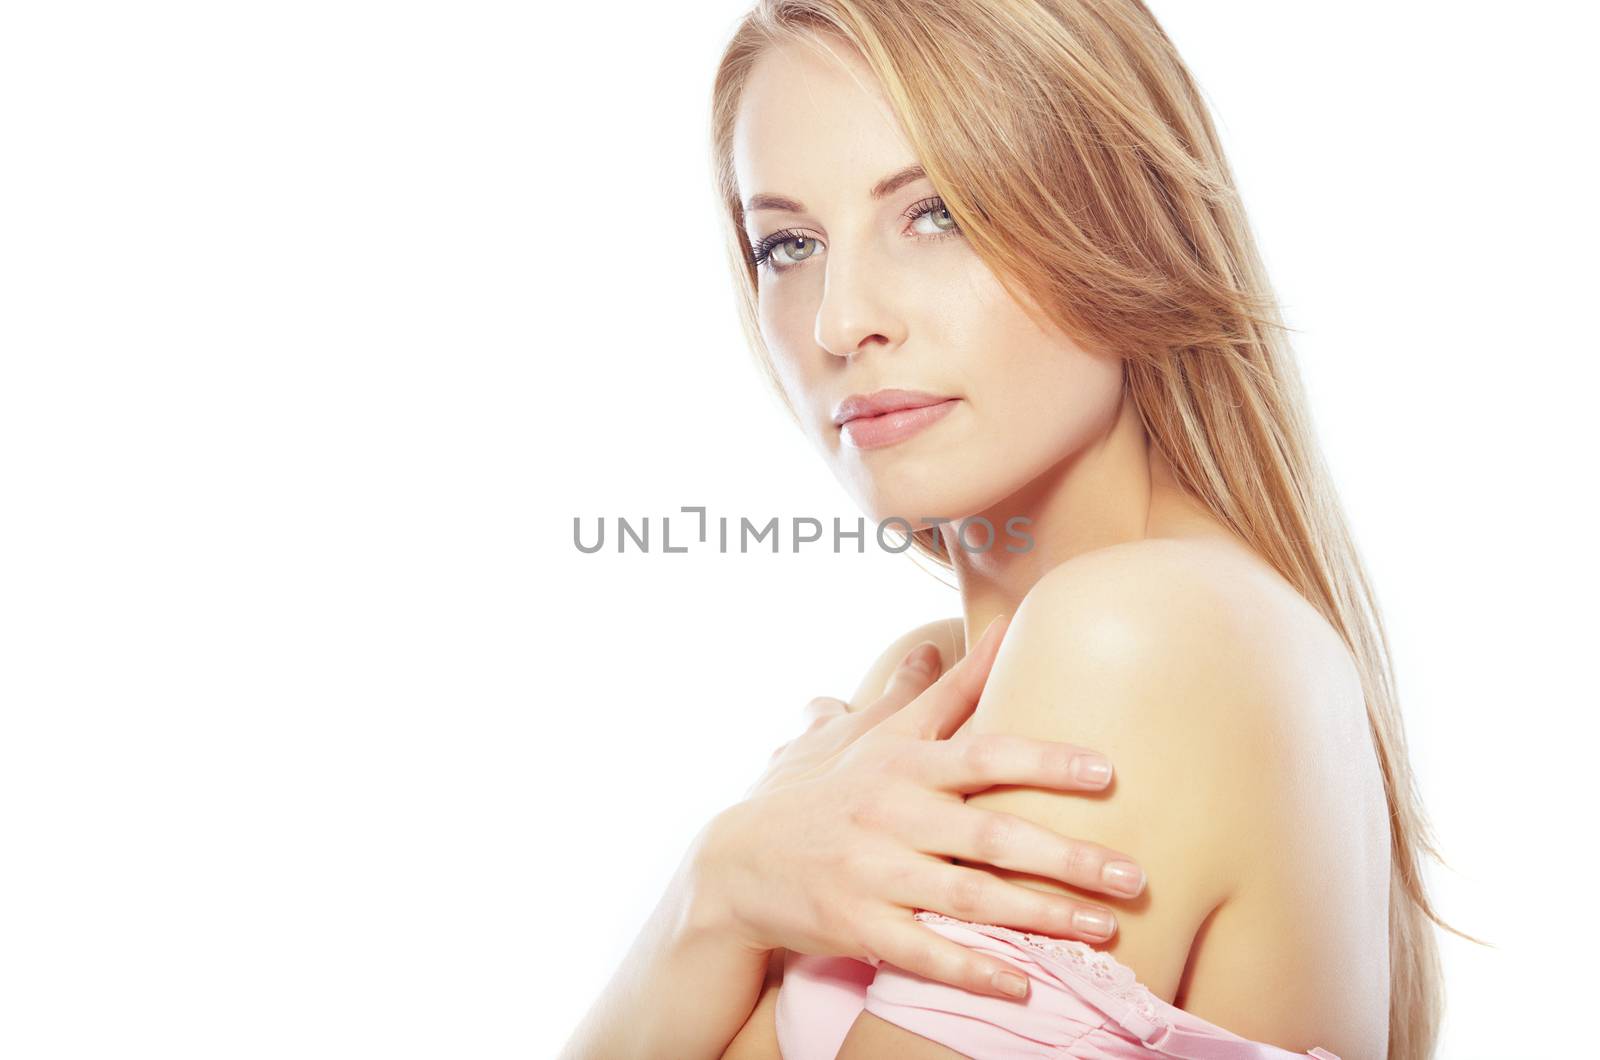 Sexy lady in pink dress with revealed shoulder on a white background